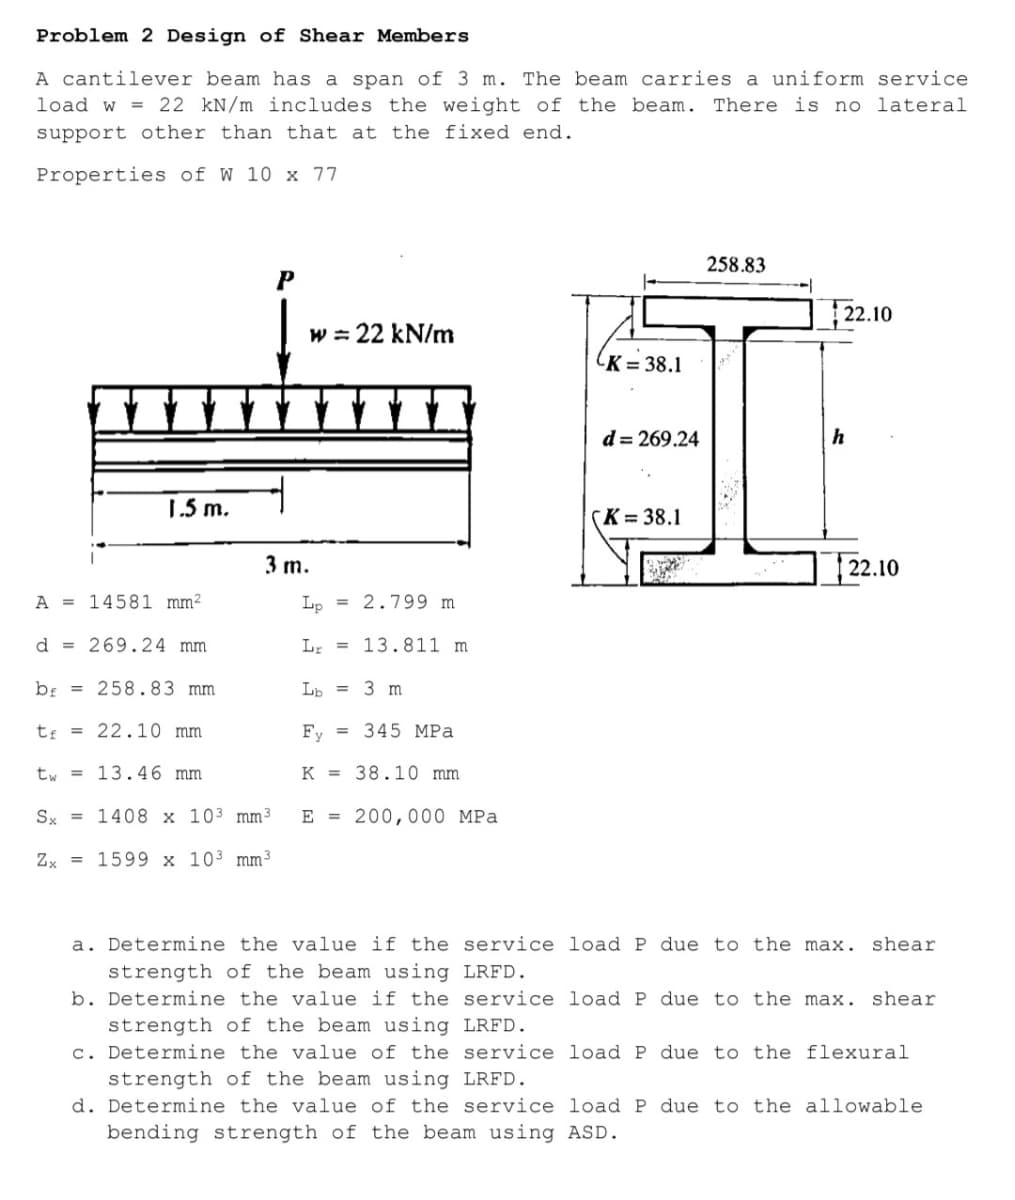 Problem 2 Design of Shear Members
A cantilever beam has a span of 3 m. The beam carries a uniform service
load w = 22 kN/m includes the weight of the beam. There is no lateral
support other than that at the fixed end.
Properties of W 10 x 77
258.83
P
|2.10
w = 22 kN/m
(K = 38.1
d = 269.24
h
1.5 m.
(K = 38.1
3 m.
|22.10
A = 14581 mm²
Lp = 2.799 m
d = 269.24 mm
L; = 13.811 m
bị = 258.83 mm
Lb = 3 m
tị = 22.10 mm
Fy
345 MPa
%3D
tw = 13.46 mm
K = 38.10 mm
Sx = 1408 x 103 mm³
E = 200,000 MPa
Zx = 1599 x 103 mm³
a. Determine the value if the service load P due to the max. shear
strength of the beam using LRFD.
b. Determine the value if the service load P due to the max. shear
strength of the beam using LRFD.
c. Determine the value of the service load P due to the flexural
strength of the beam using LRFD.
d. Determine the value of the service load P due to the allowable
bending strength of the beam using ASD.
